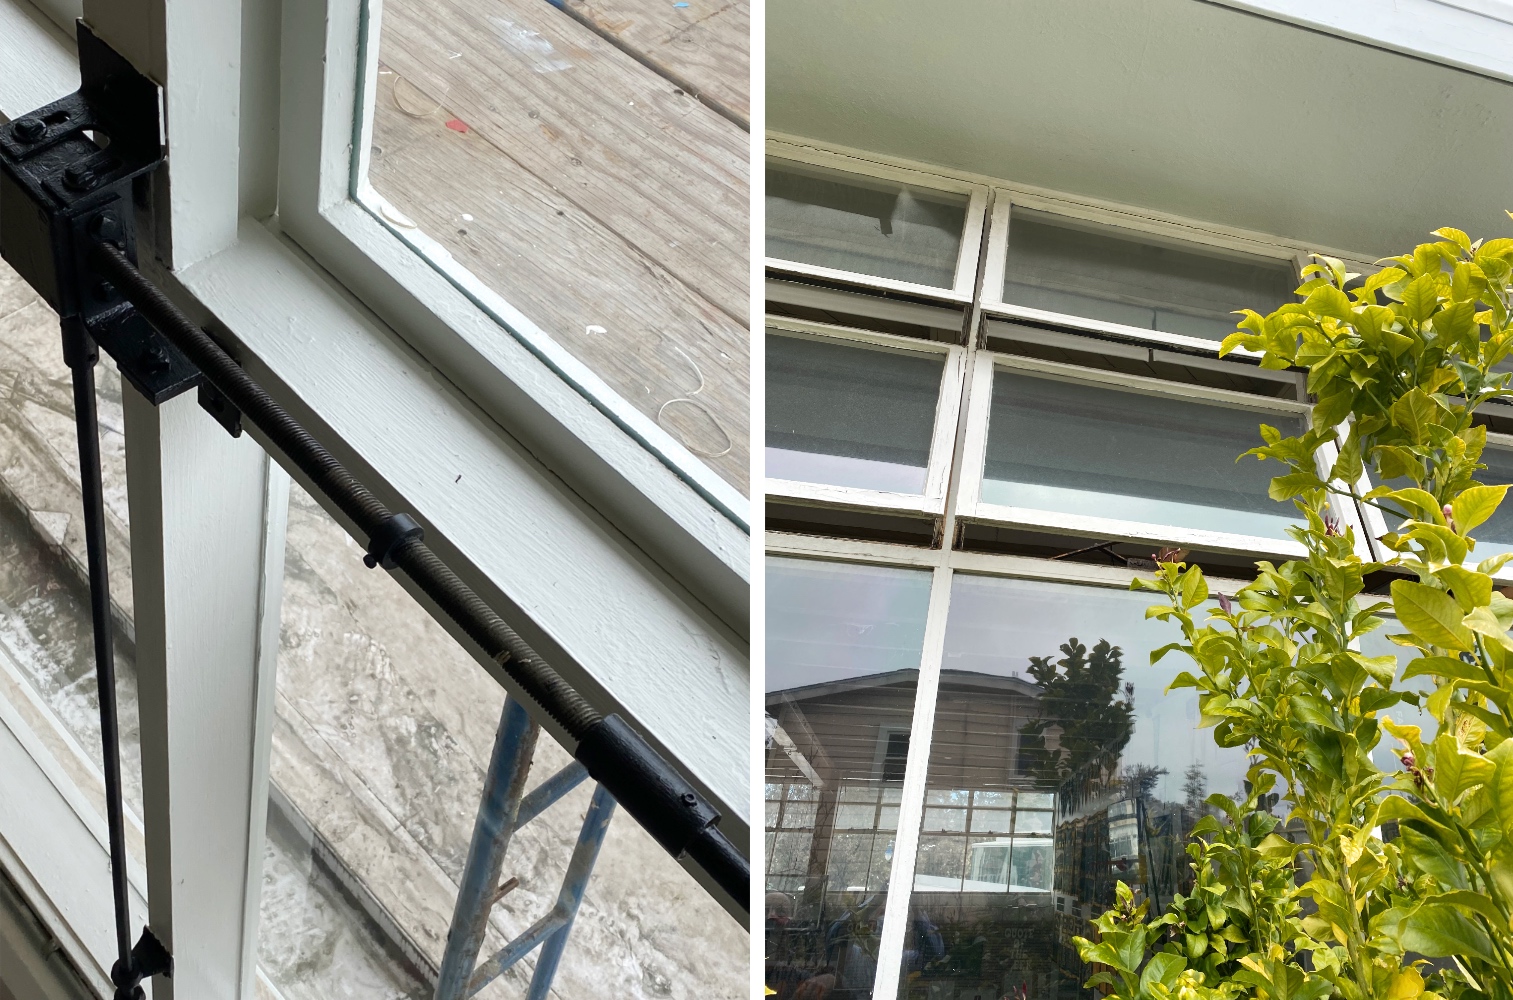 Window operating mechanisms and deteriorated wood frames led school staff to weigh historic window restoration vs. replacement.